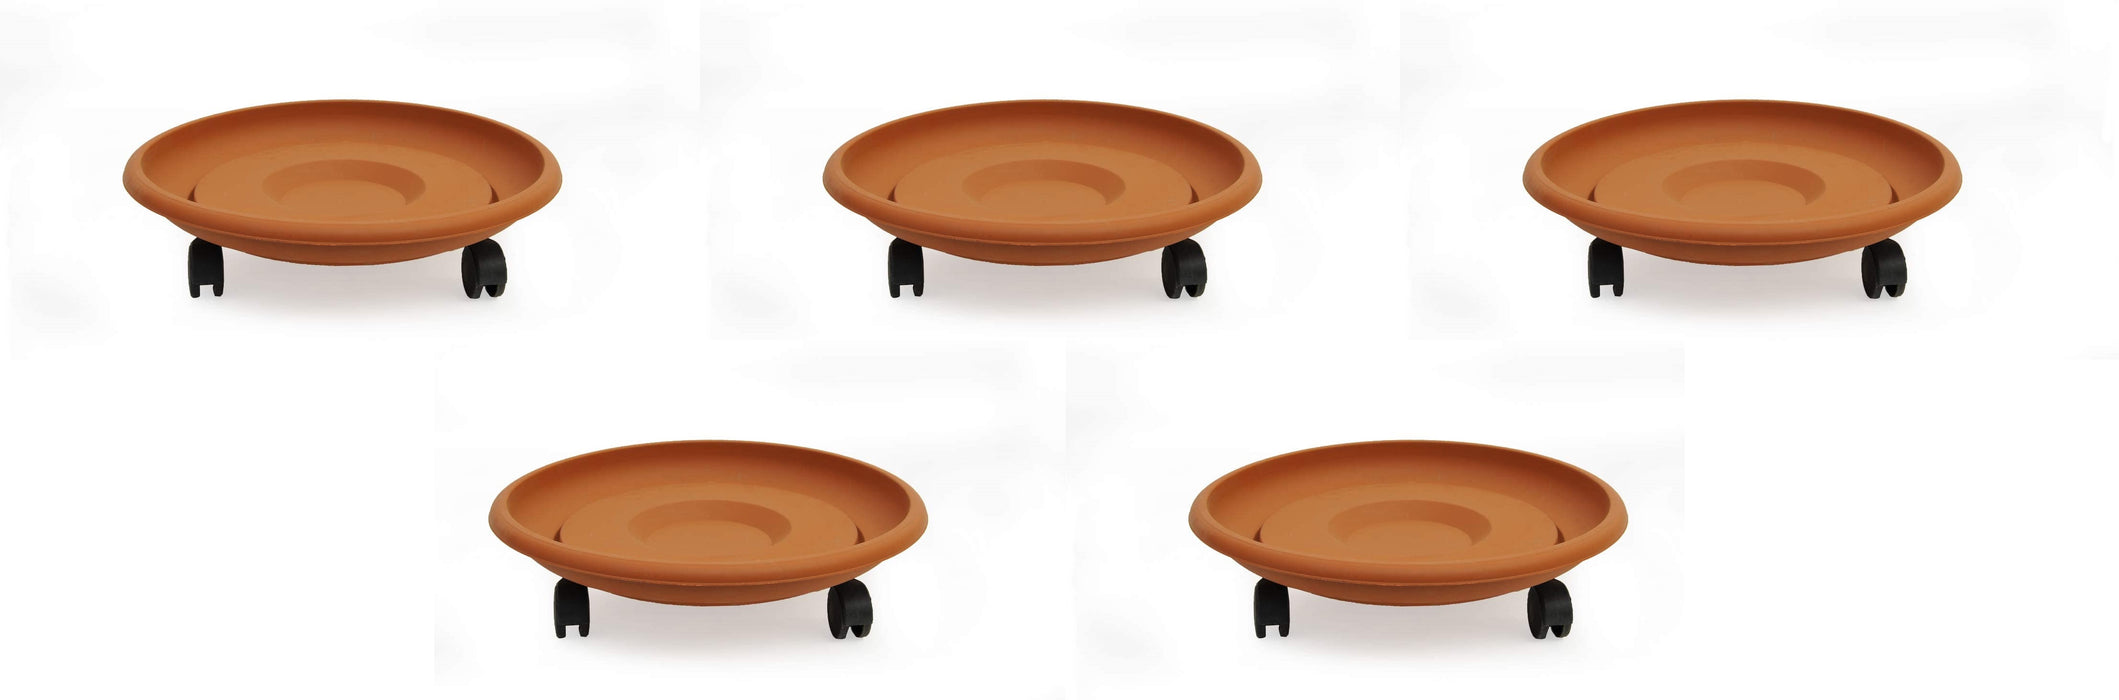 Movable Planters with Wheels. Round Caddy Plant Mover Stand Tray Saucer. (Terra Cotta)